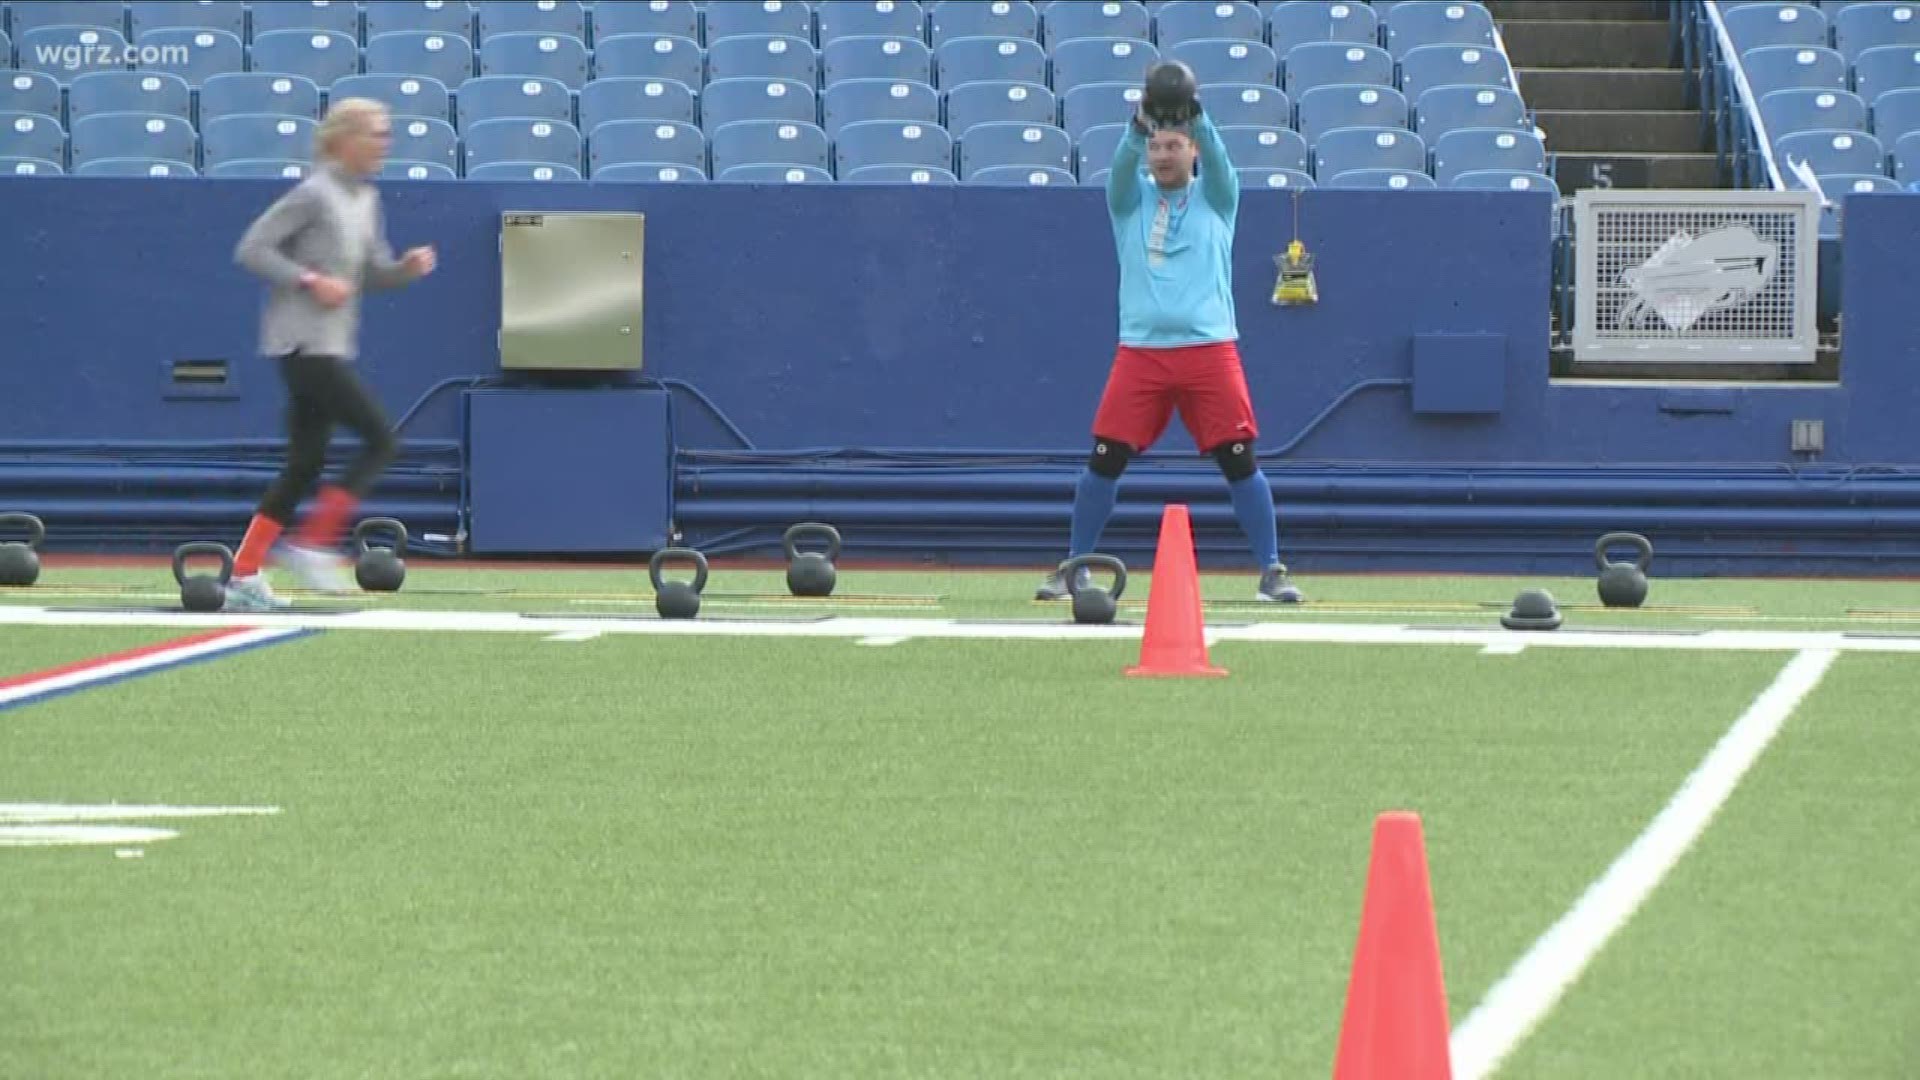 The Gronkowski brothers held an obstacle course at New Era Field today to tackle fitness.